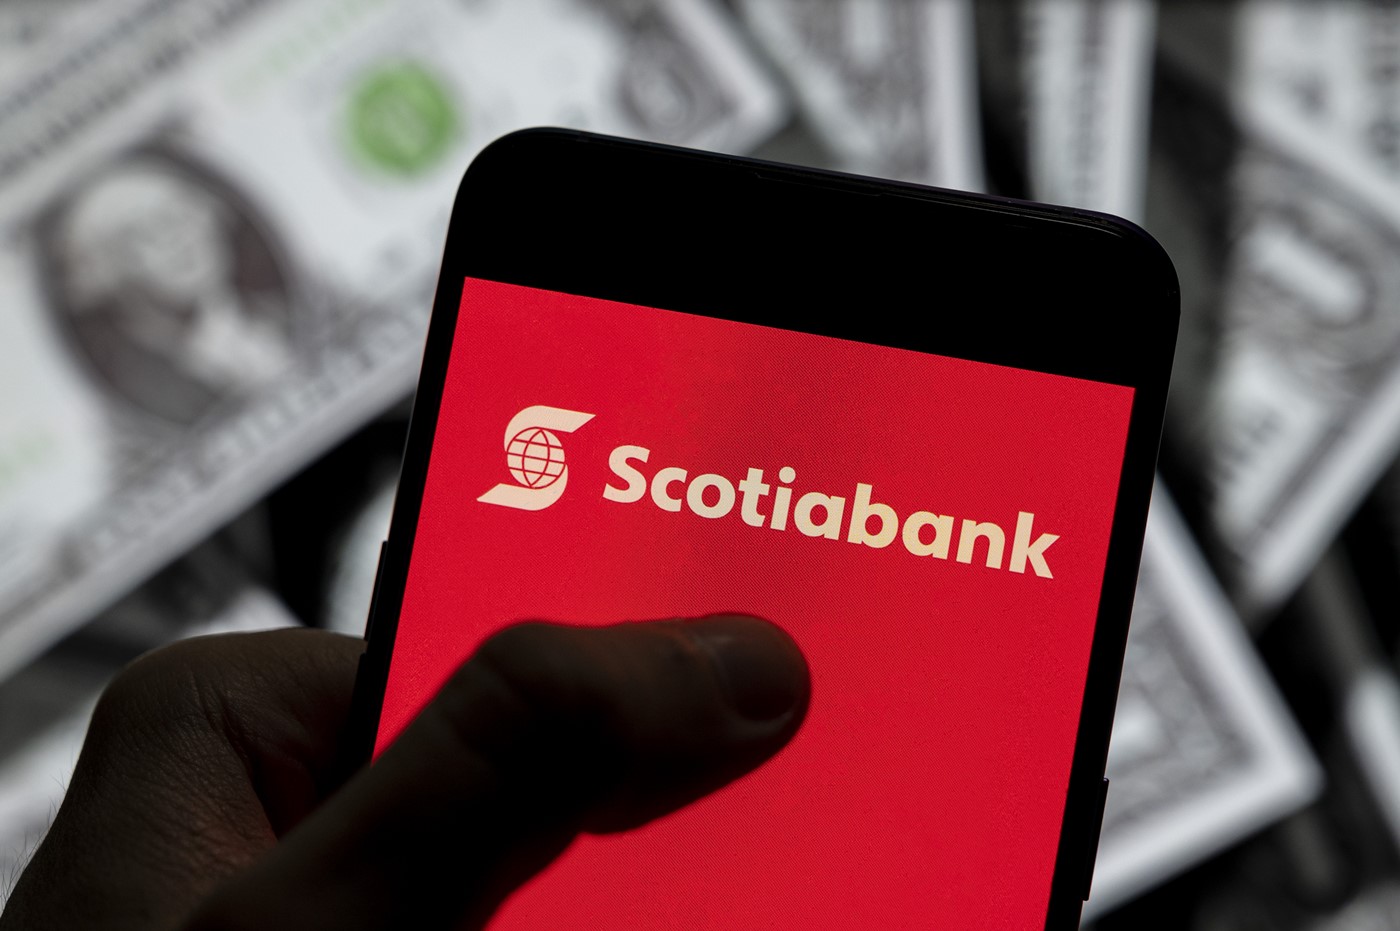 Scotiabank’s return to competitive mortgage pricing is “huge” for brokers